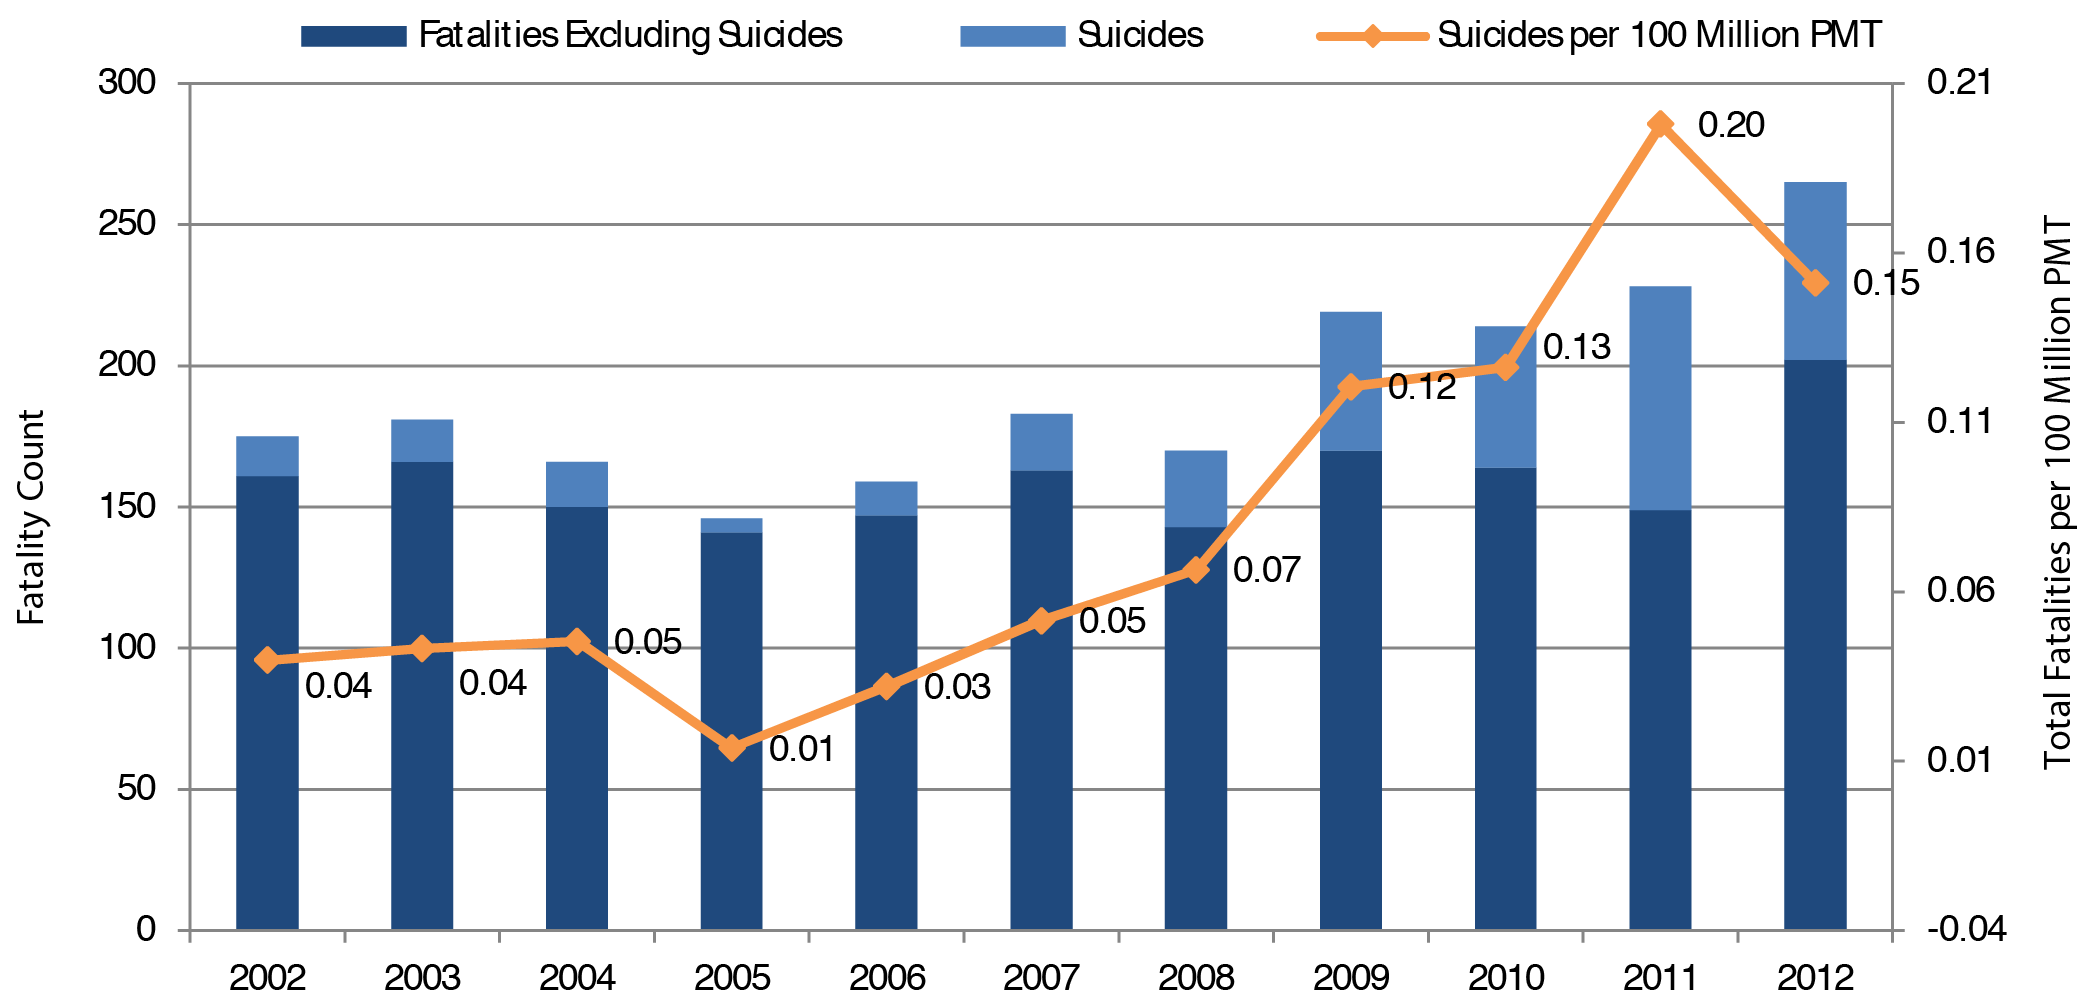 A stacked bar chart plots fatality count for the time period 2002 through 2012, and a line chart plots transit-related suicides per 100 million PMT. For 2002, the count for fatalities excluding suicides is 161 and the count for suicides is 14. The trend is flat until the year 2005, when the count for fatalities excluding suicides drops to 141 and the count for suicides drops to 5. The trend returns to the levels established for 2002, then increases in the year 2009, when the count for fatalities excluding suicides reaches 170 and the count for suicides reaches 49. In 2010, the count for fatalities excluding suicides is 164 and the count for suicides is 50. In 2012, the count for fatalities excluding suicides increases to 202 and the count for suicides is 63.  The plot for transit-related suicides per 100 million PMT has an initial value of 0.04 in 2002 and holds steady through the year 2004. The trend is down to 0.01 in 2005, then upward to 0.07 in 2008, and more sharply upward to 0.13 in 2010 and reaches its highest value of 0.20 in 2011. This rate drops down to 0.15 in 2012. 